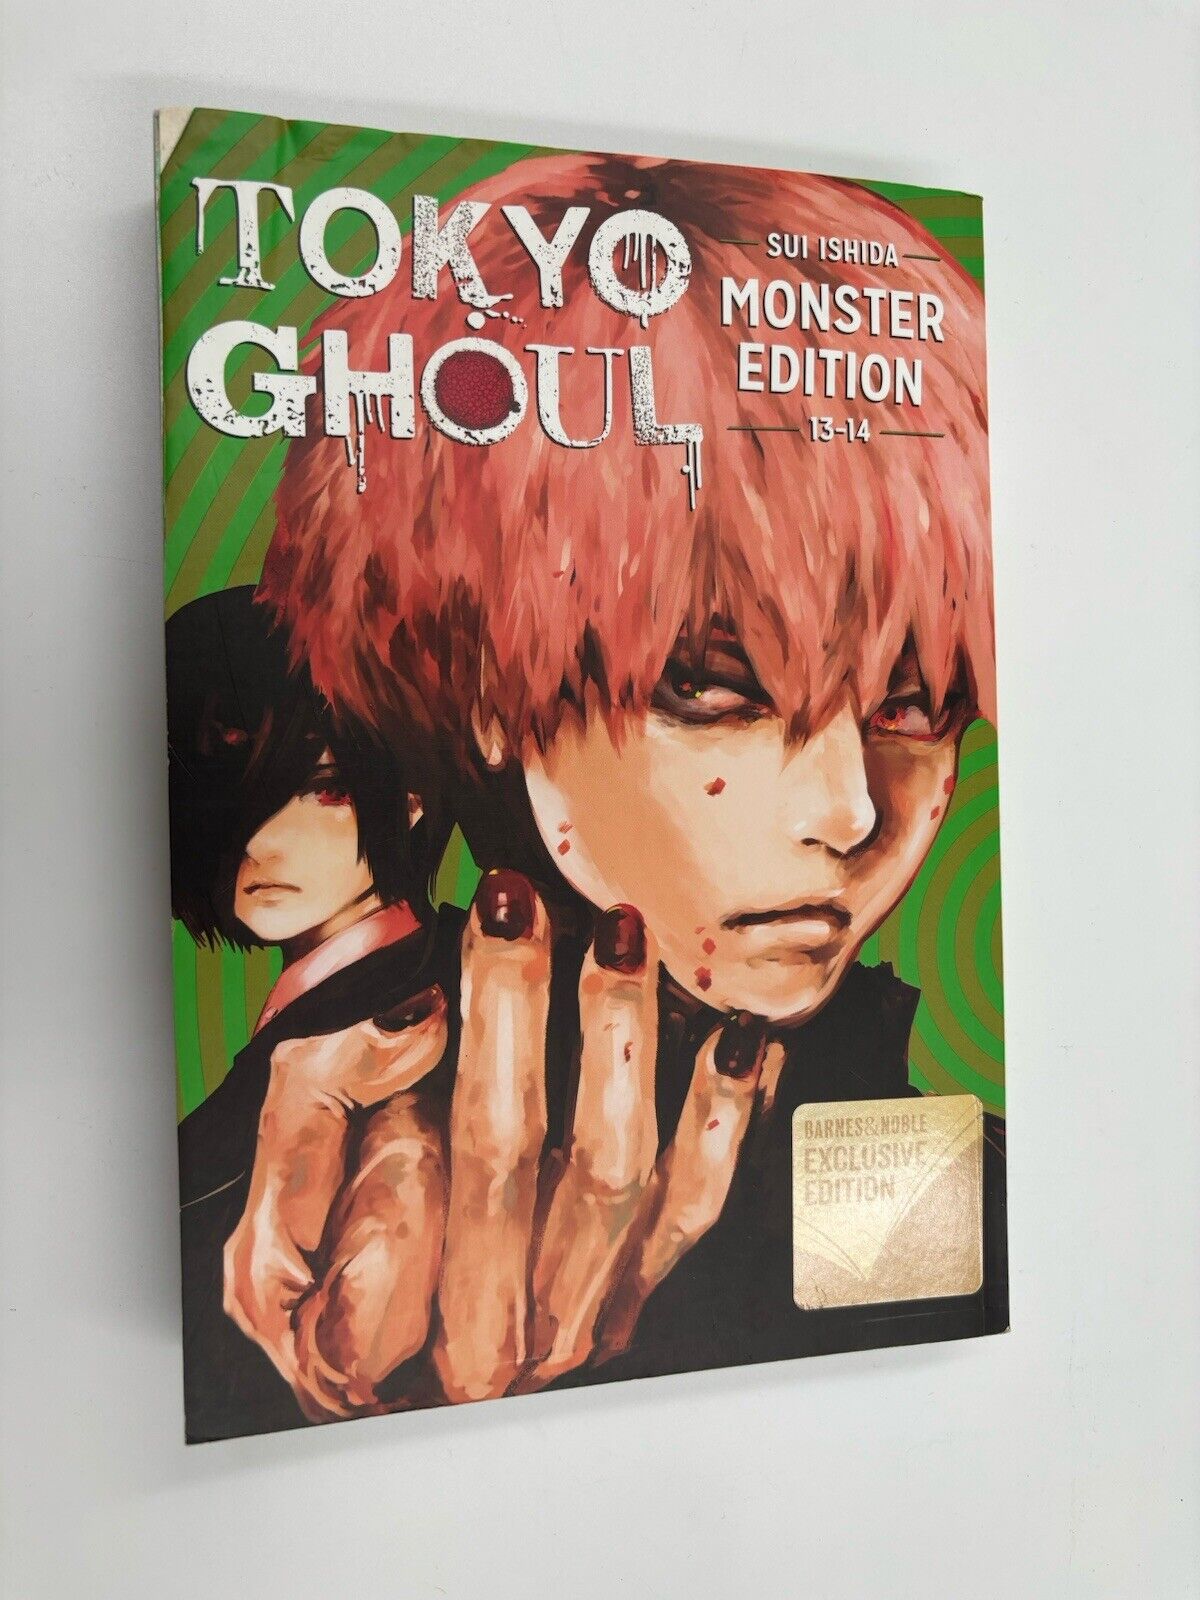 Tokyo Ghoul (Monster Edition) Volumes 13-14 English Manga B&N Exclusive Edition